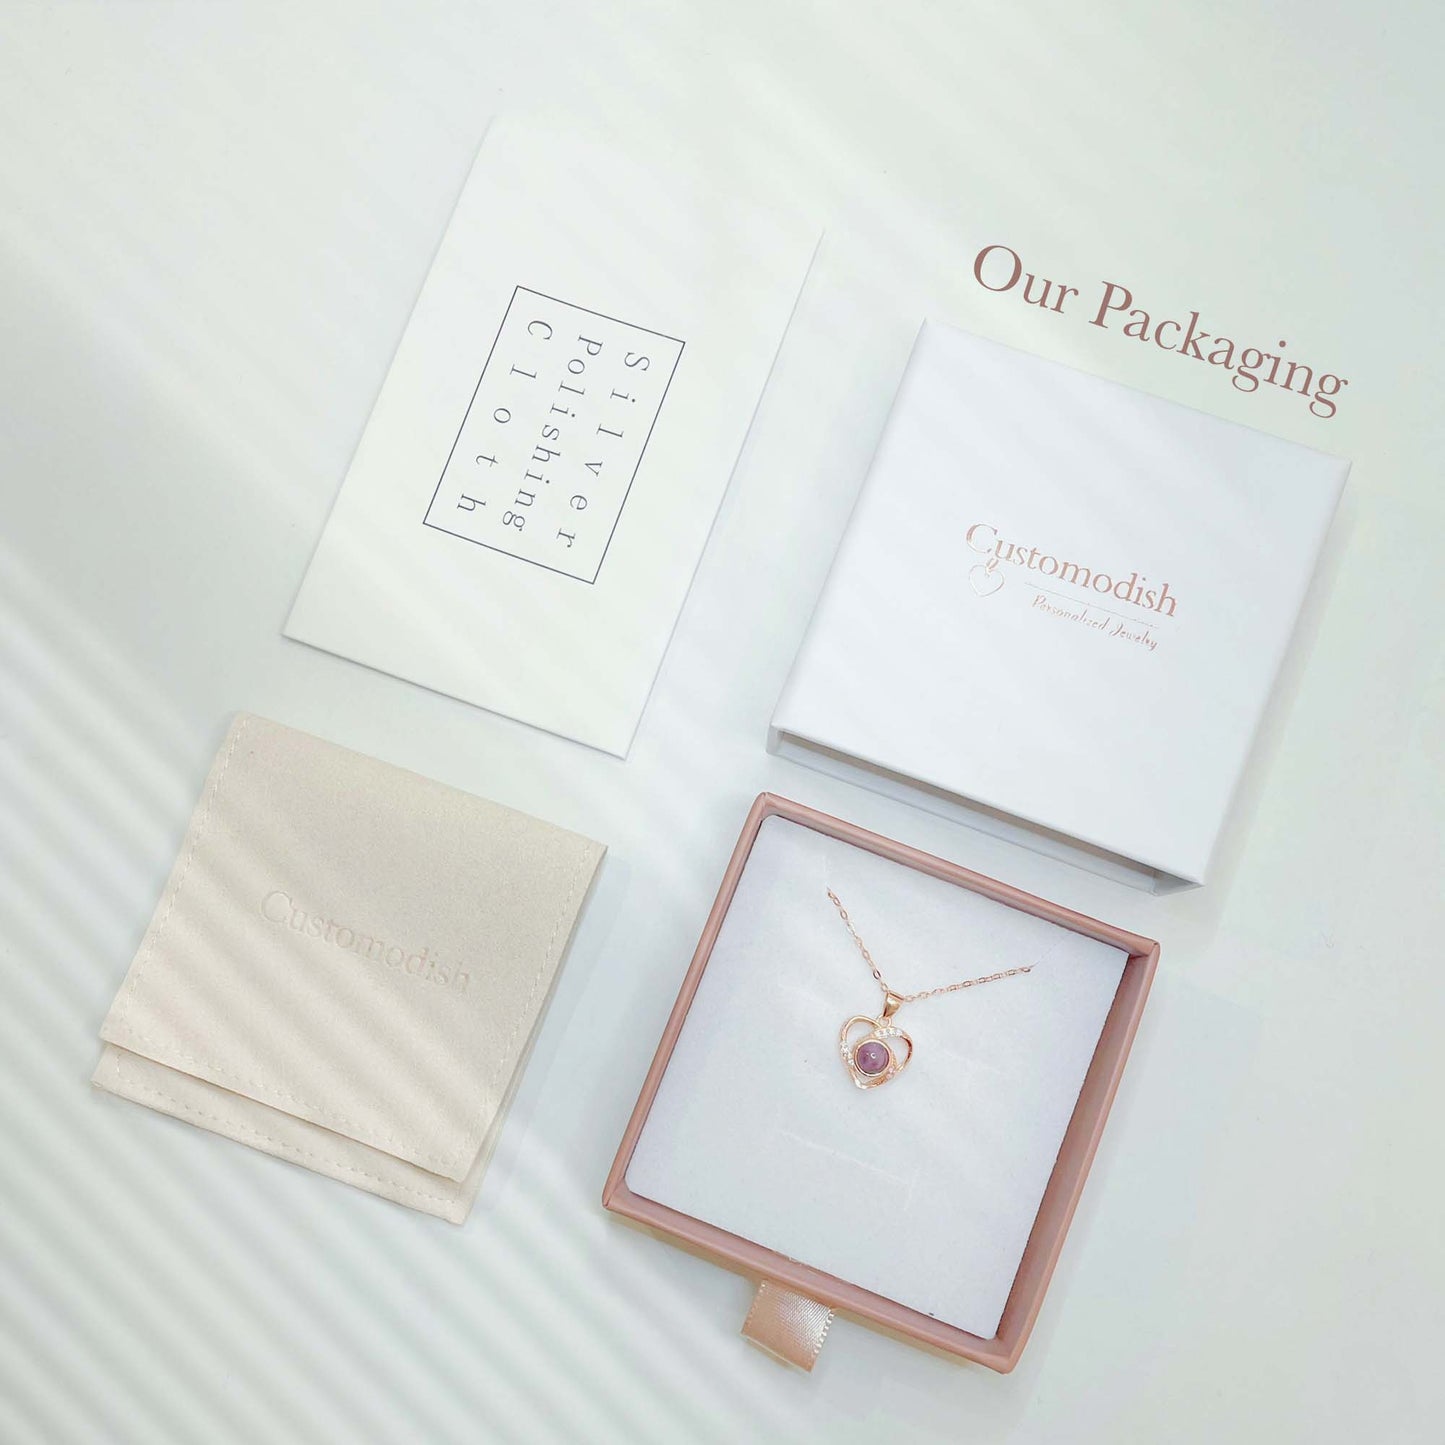 Customodish offers gift packaging with a nice jewelry box. Perfect gift for your loved ones!